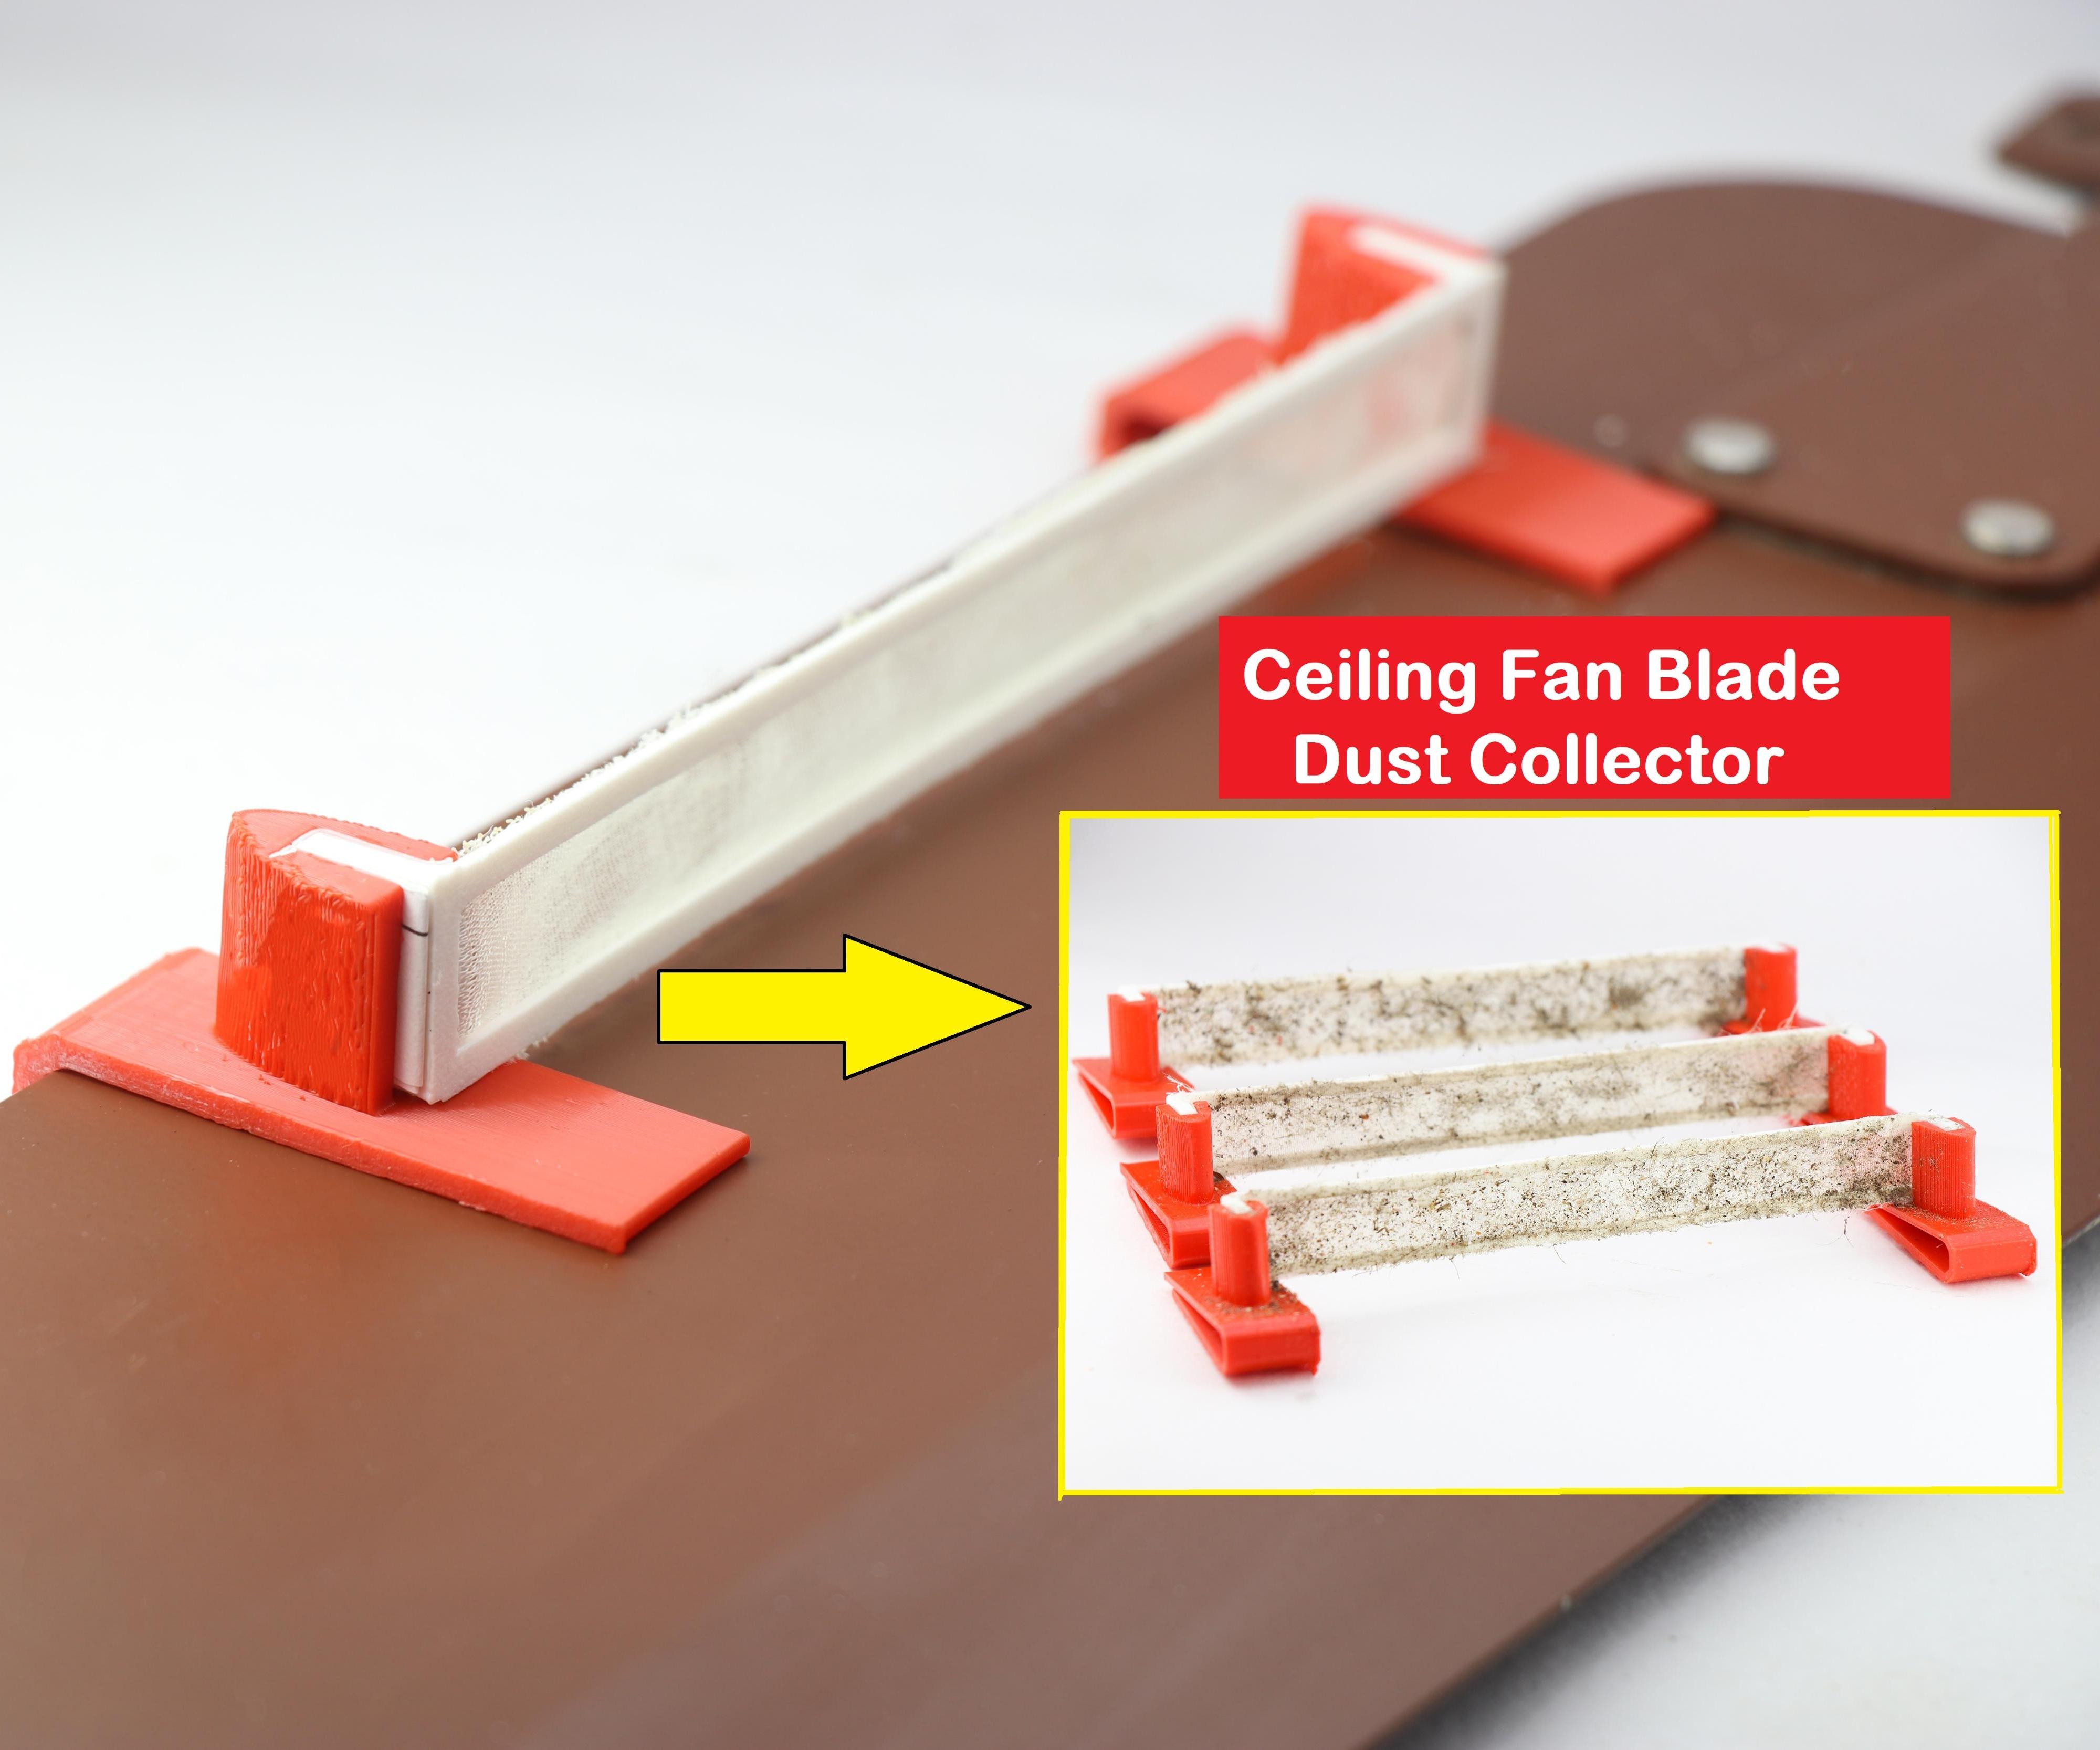 Ceiling Fan Blade Dust Collector That Can Save Lungs From Room Dust